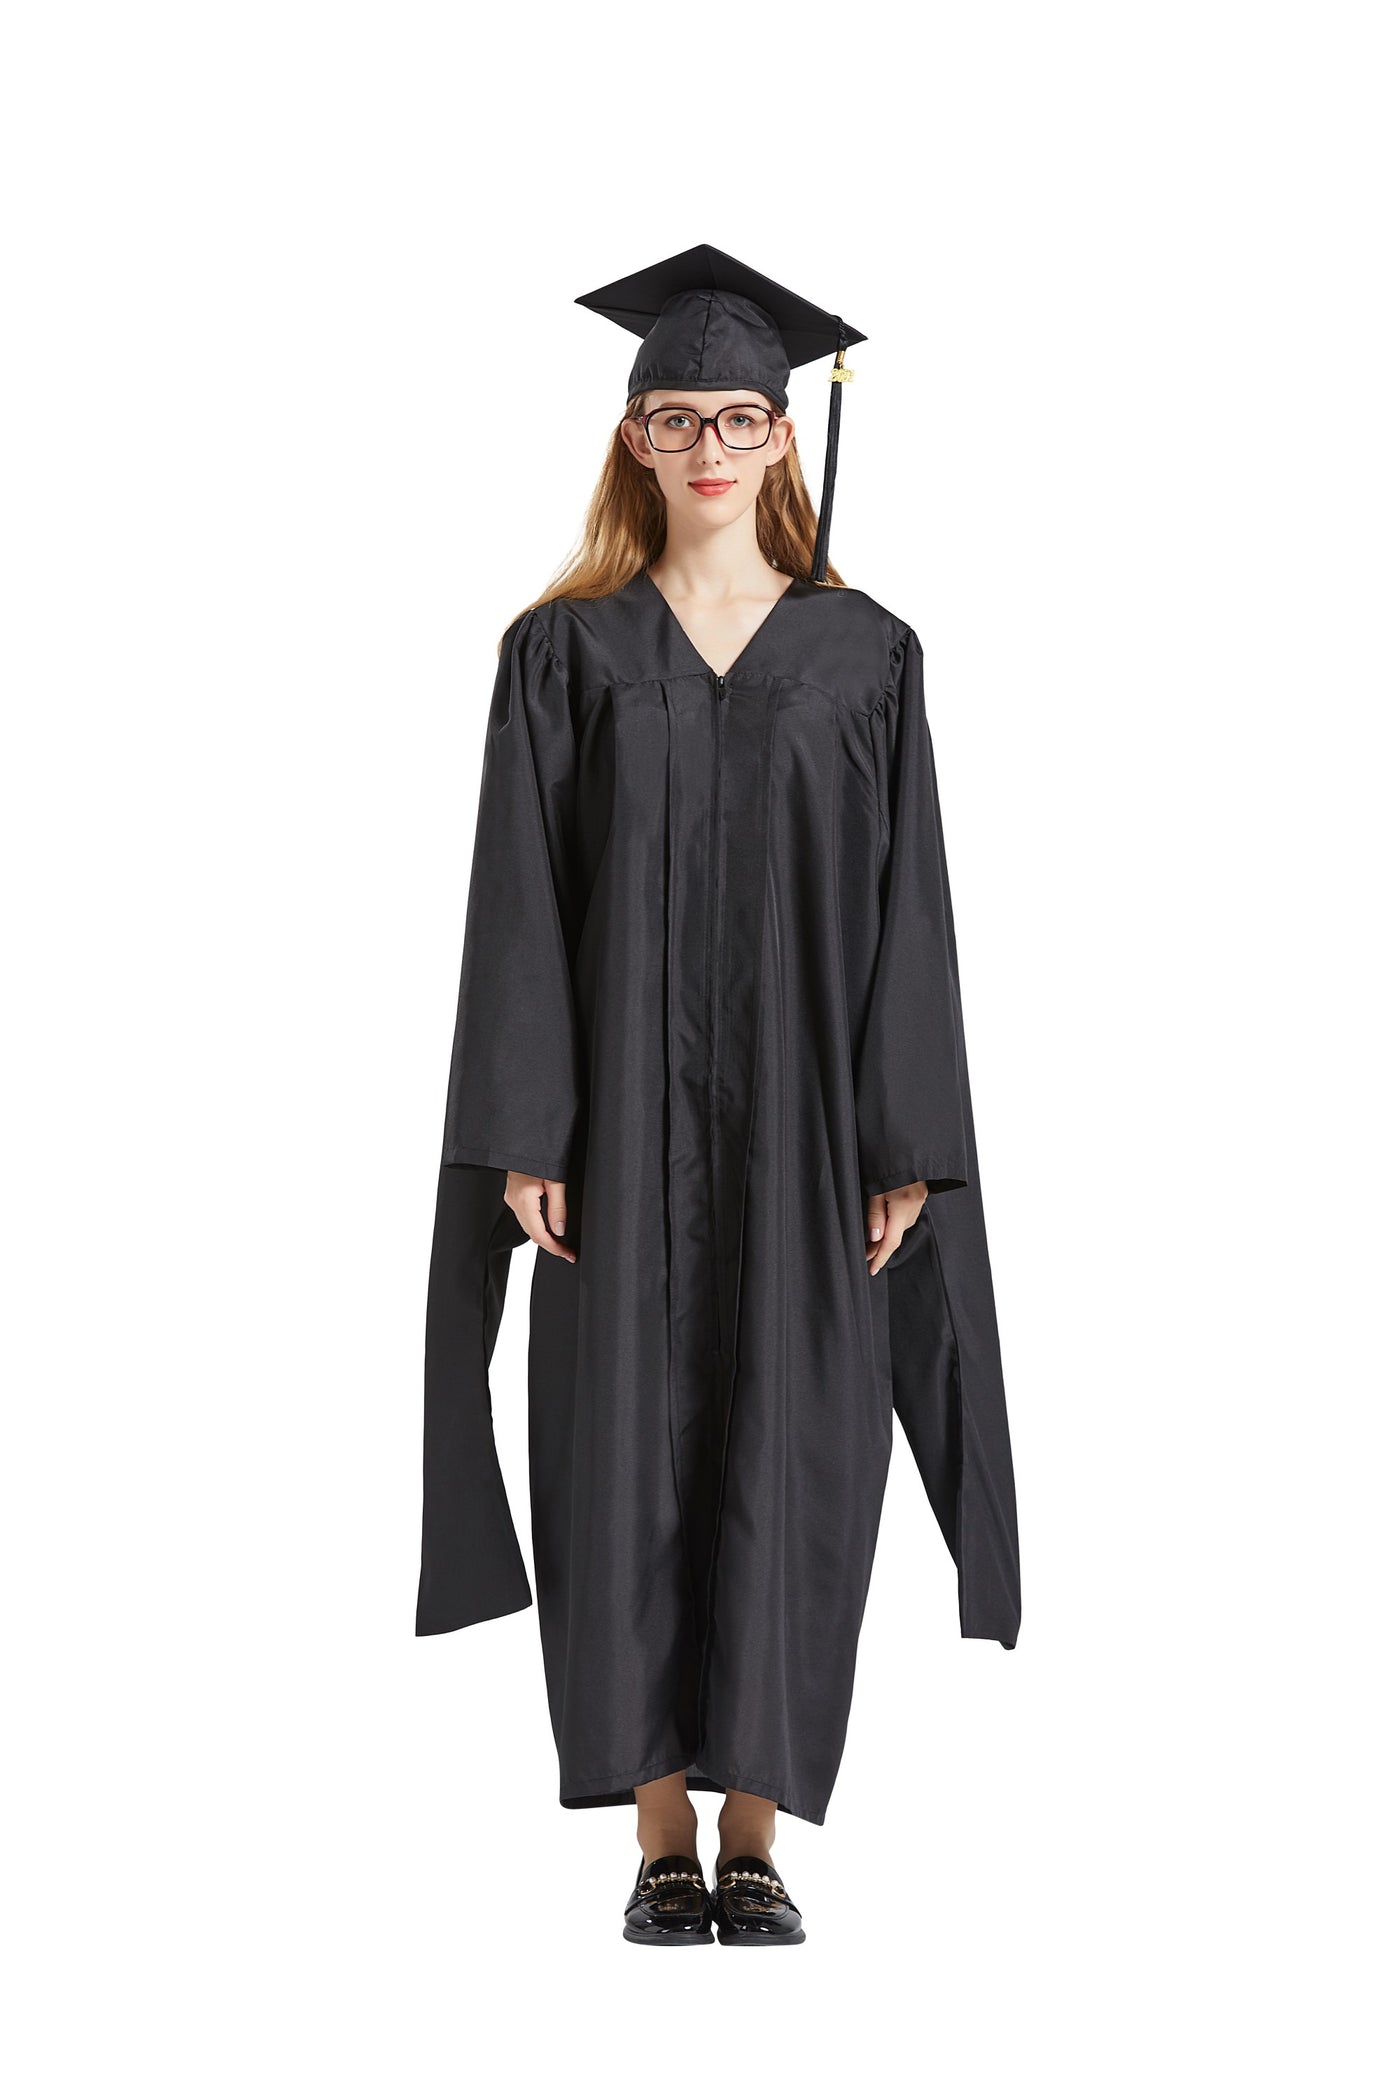 2023&2022 Graduation Master Cap and Gown Set